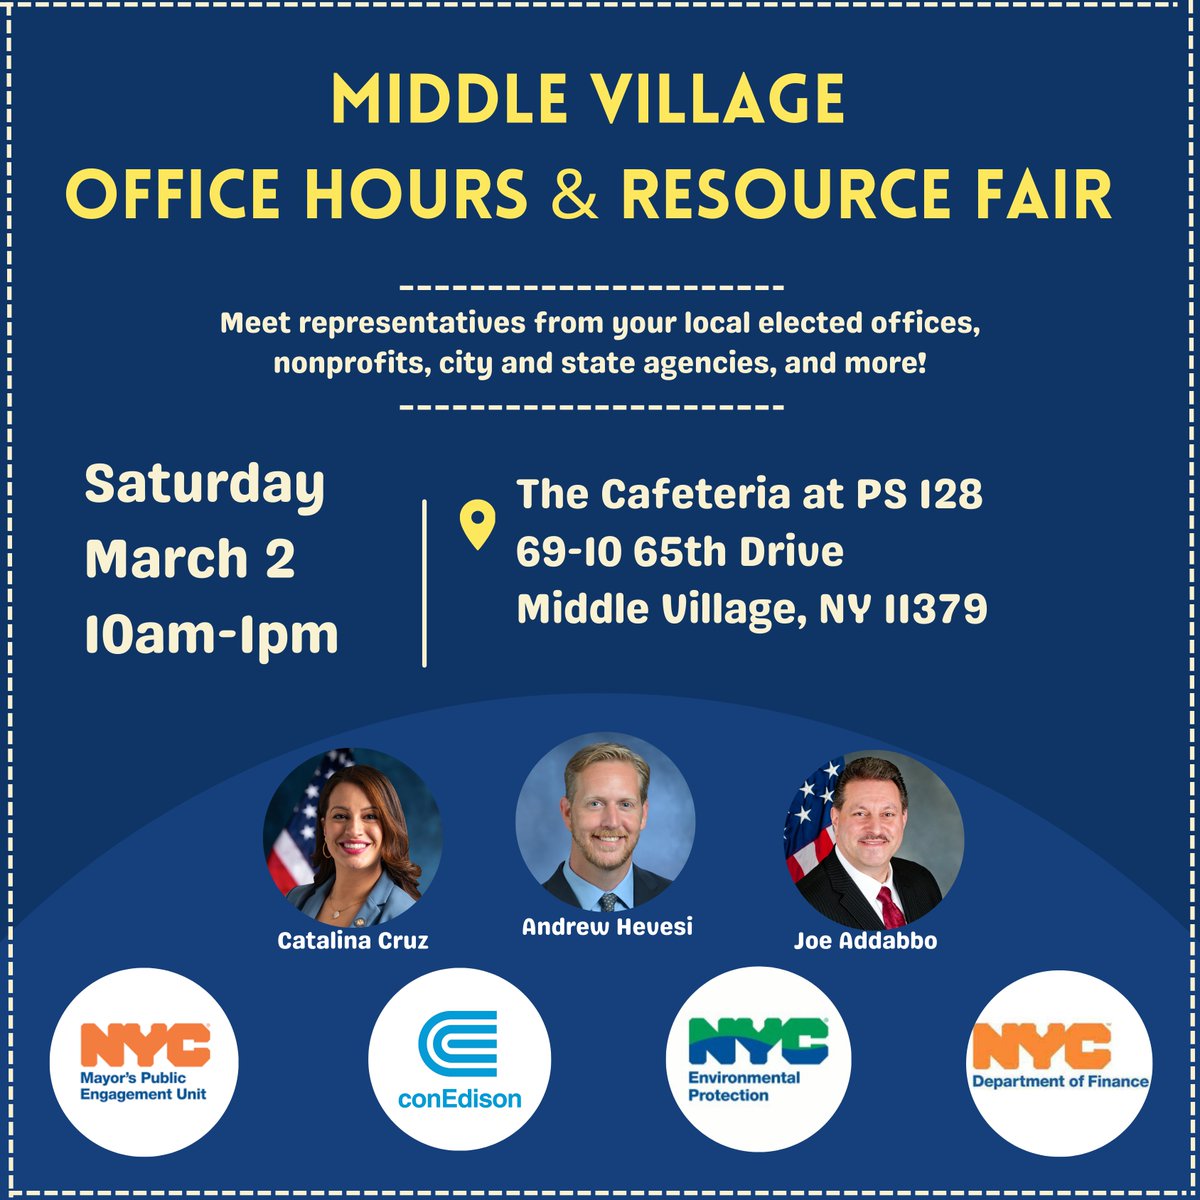 Join @CatalinaCruzNY @SenJoeAddabbo and my team for mobile office hours on 3/2, from 10am-1pm at PS 128 in #MiddleVillage! Attendees can address concerns with our offices, agency reps, meet like minded neighbors and make their voices heard. Please contact us with any questions!